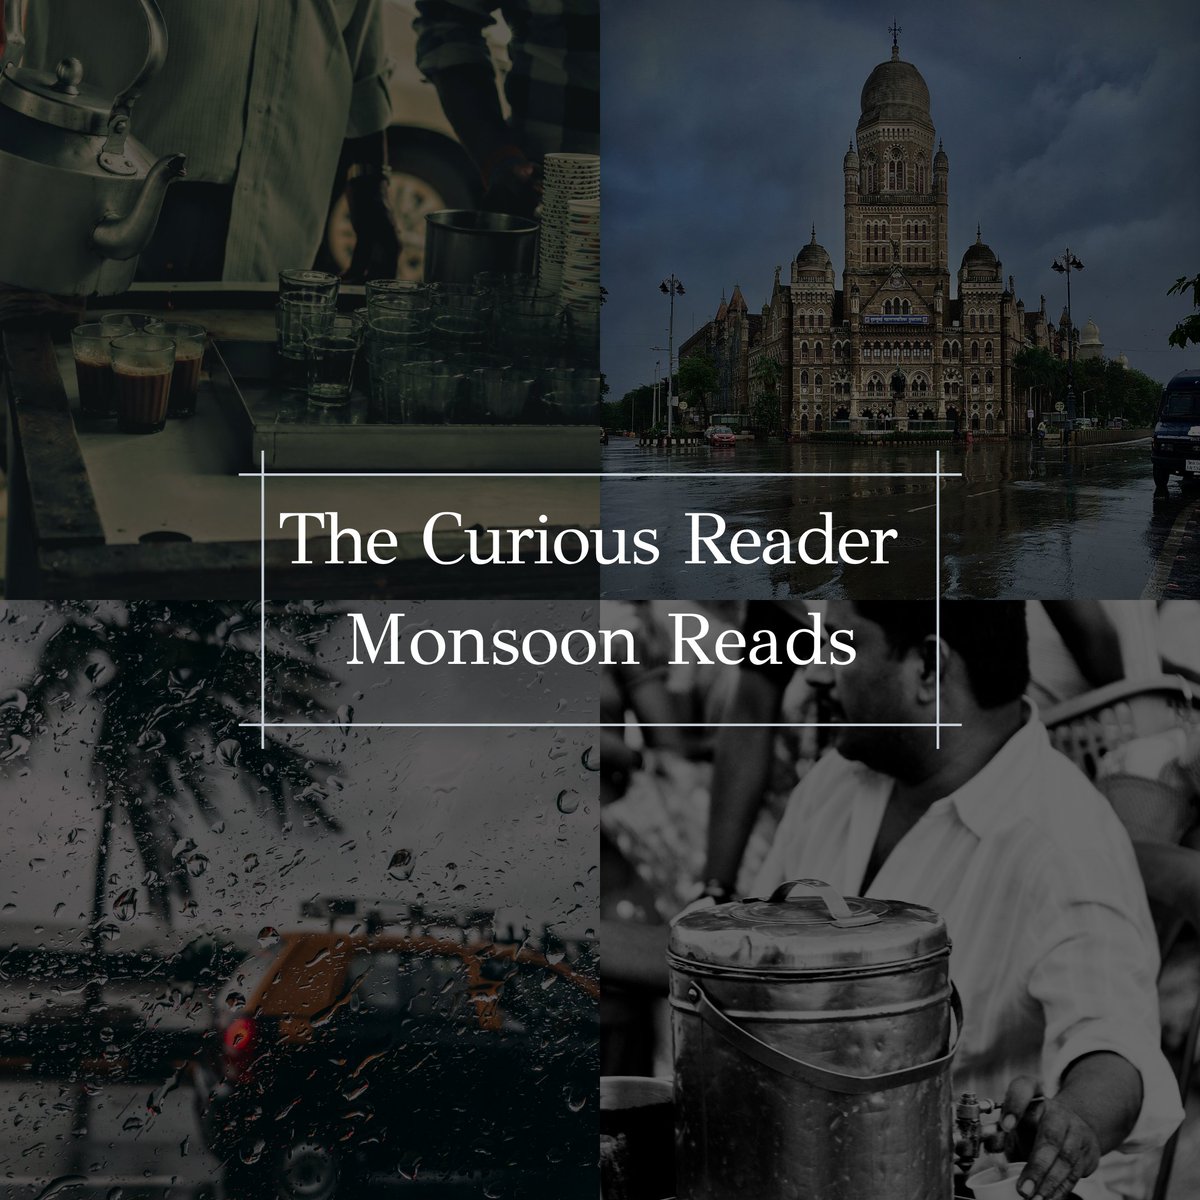 As we get set to enjoy the rainy weekend, curled up indoors with a book, The Curious Reader team shares our favourite monsoon reads. Let us know in the comments what your monsoon comfort read is.  #Monsoon2020  #Thread